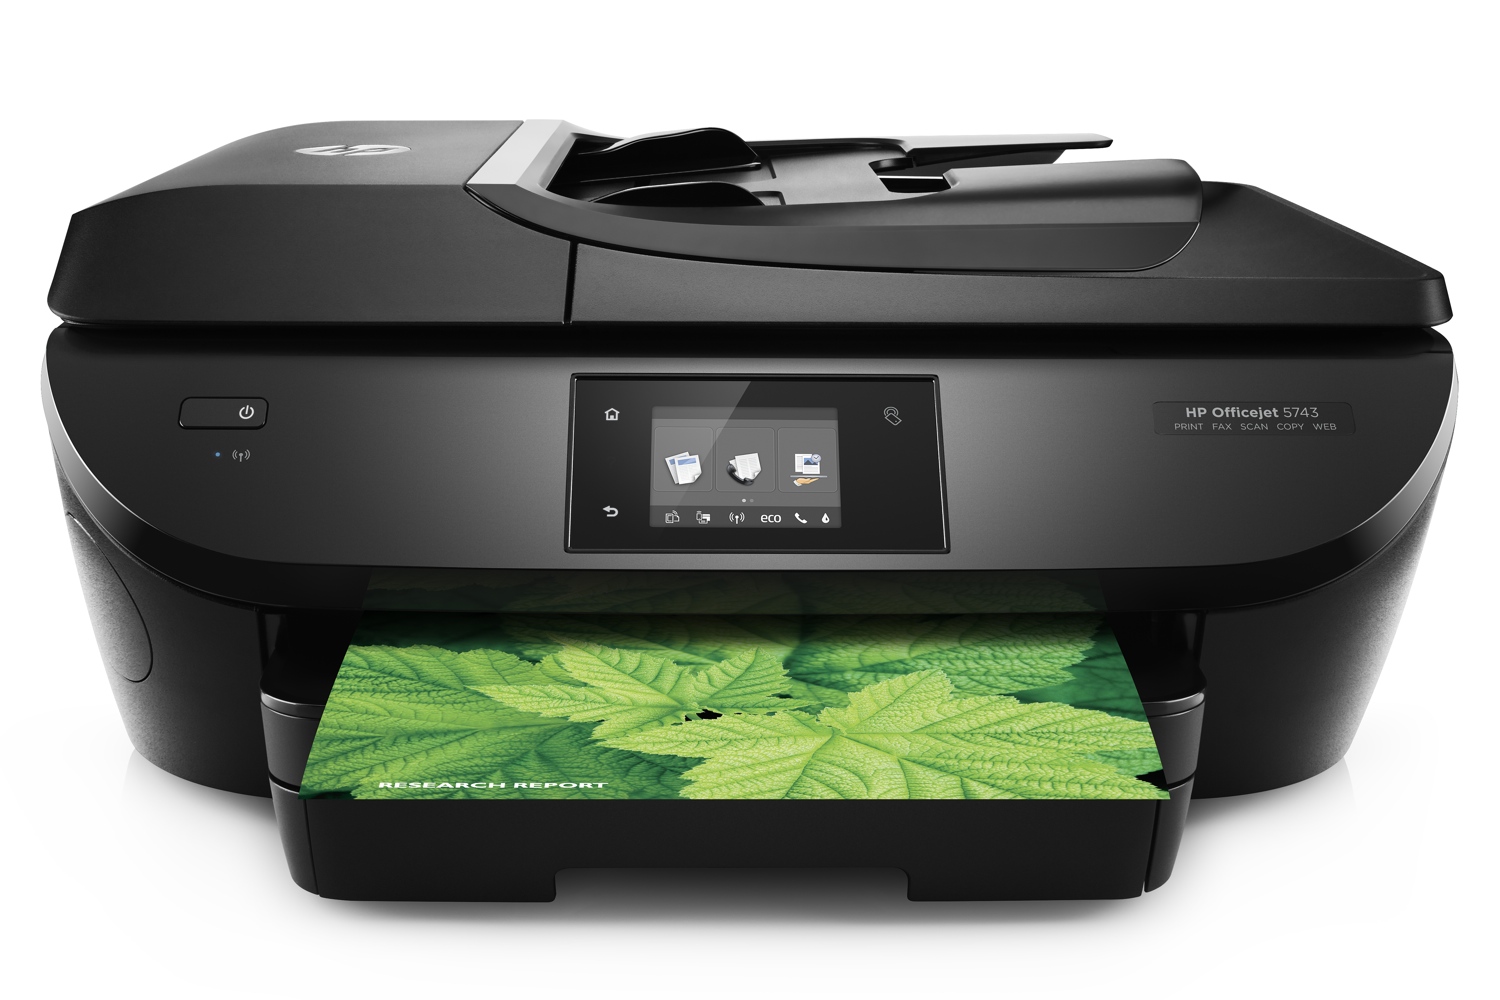 hp puts spotlight on instant ink refill program with new inkjet printers officejet 5743 product